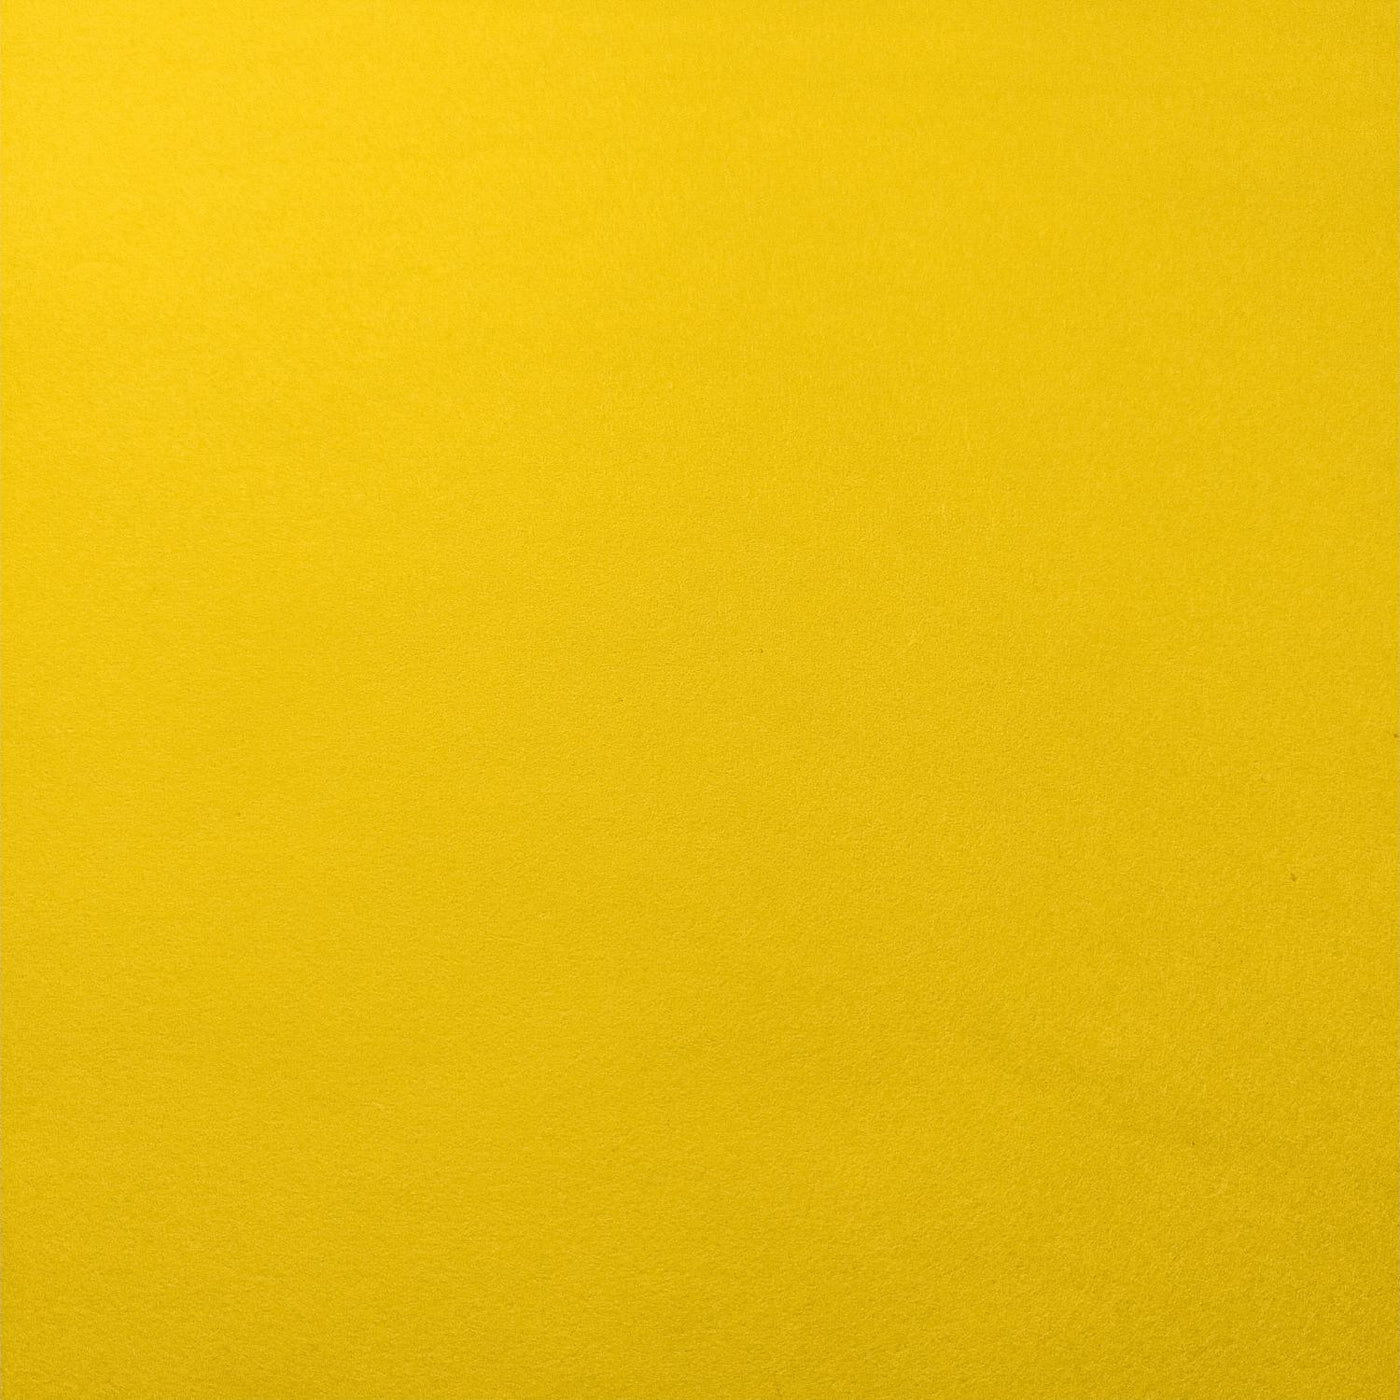 Solid-Colored Kozo Mulberry Paper (Canary Yellow)